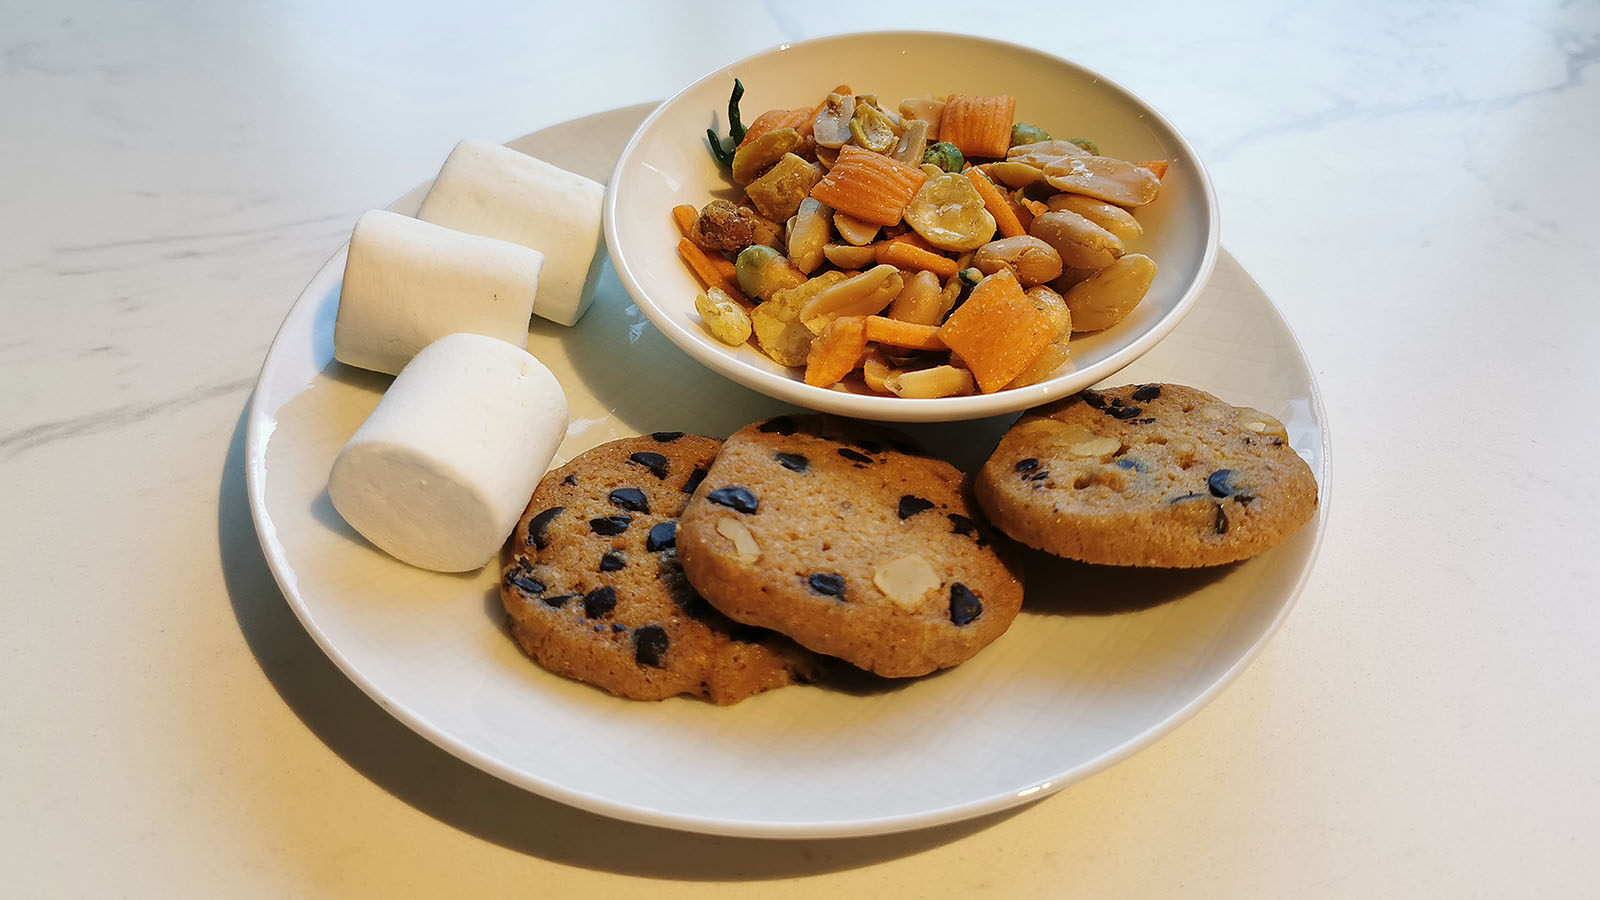 Cookies, marshmallows and nibbles at Hilton Singapore Orchard Executive Lounge